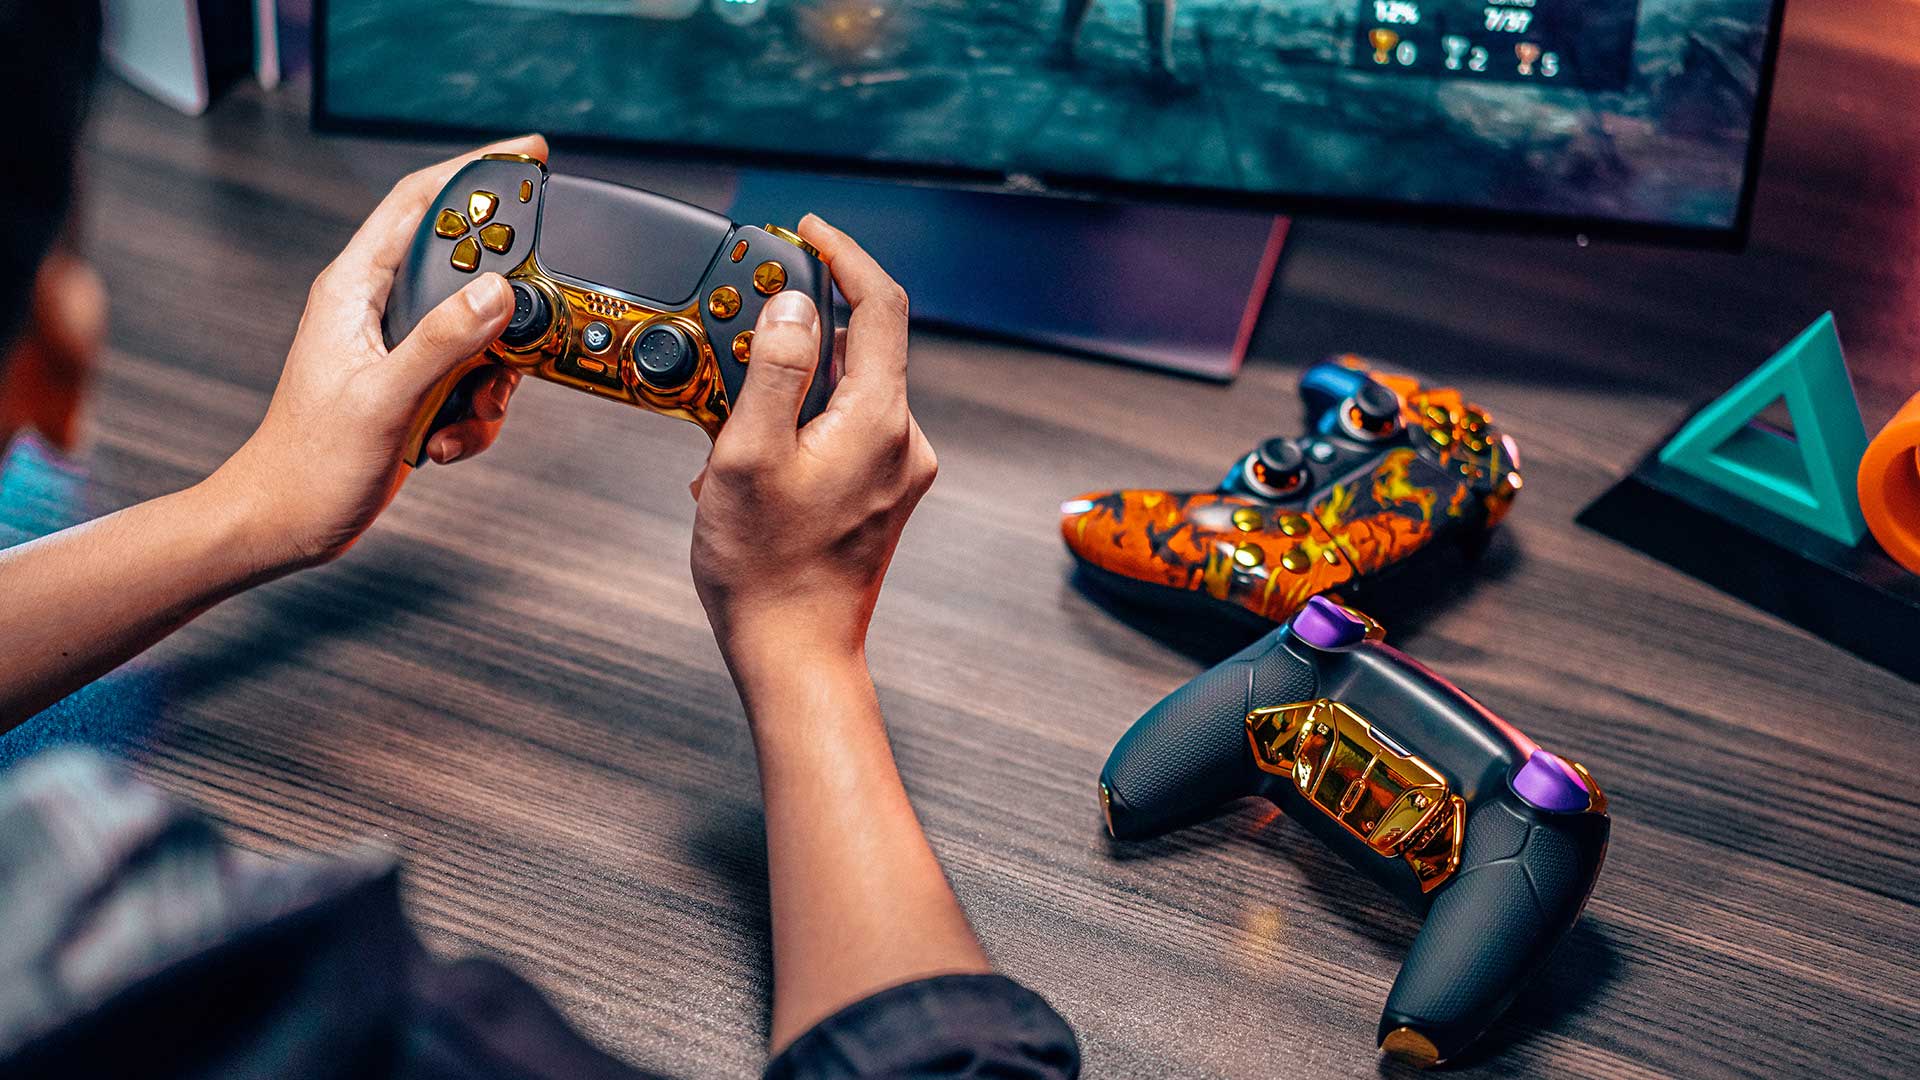 HexGaming controllers on sale for Prime Day